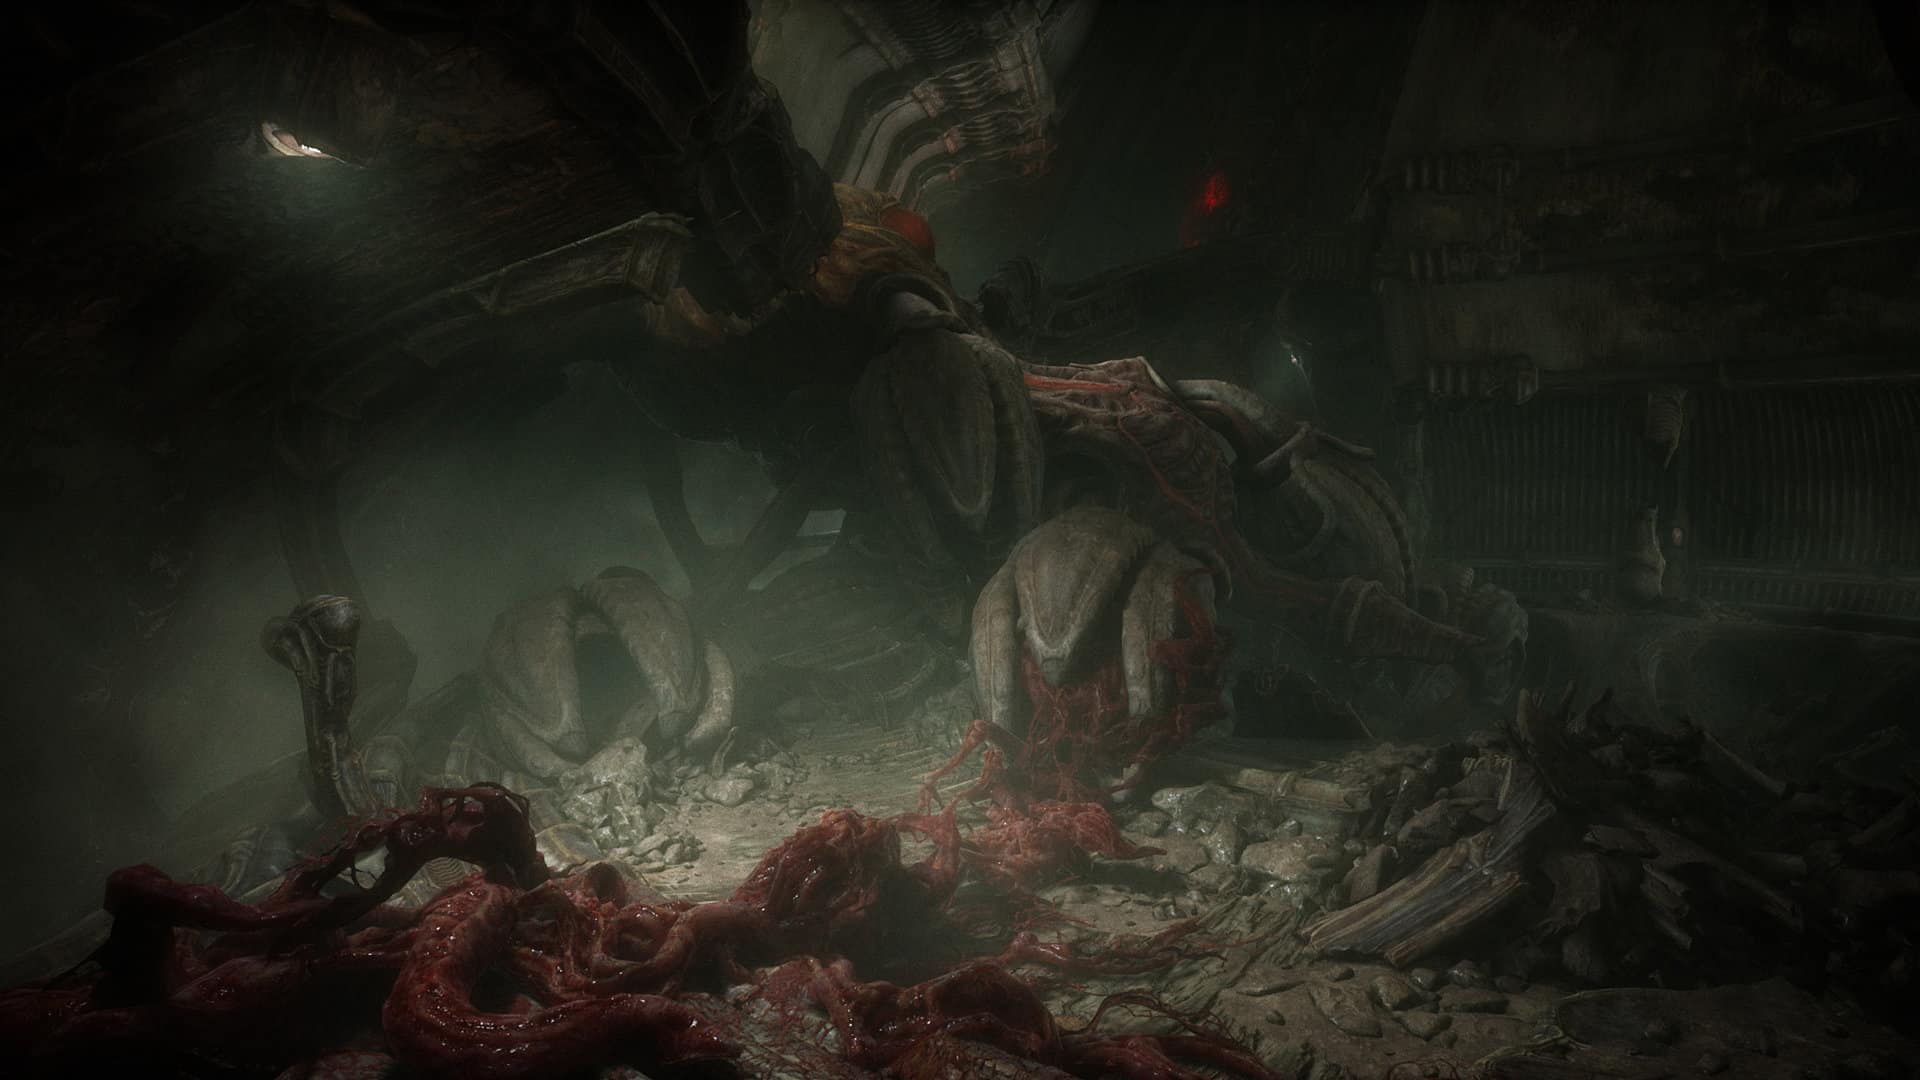 Scorn Slips With Its H.R. Giger Inspired Horror Into 2022